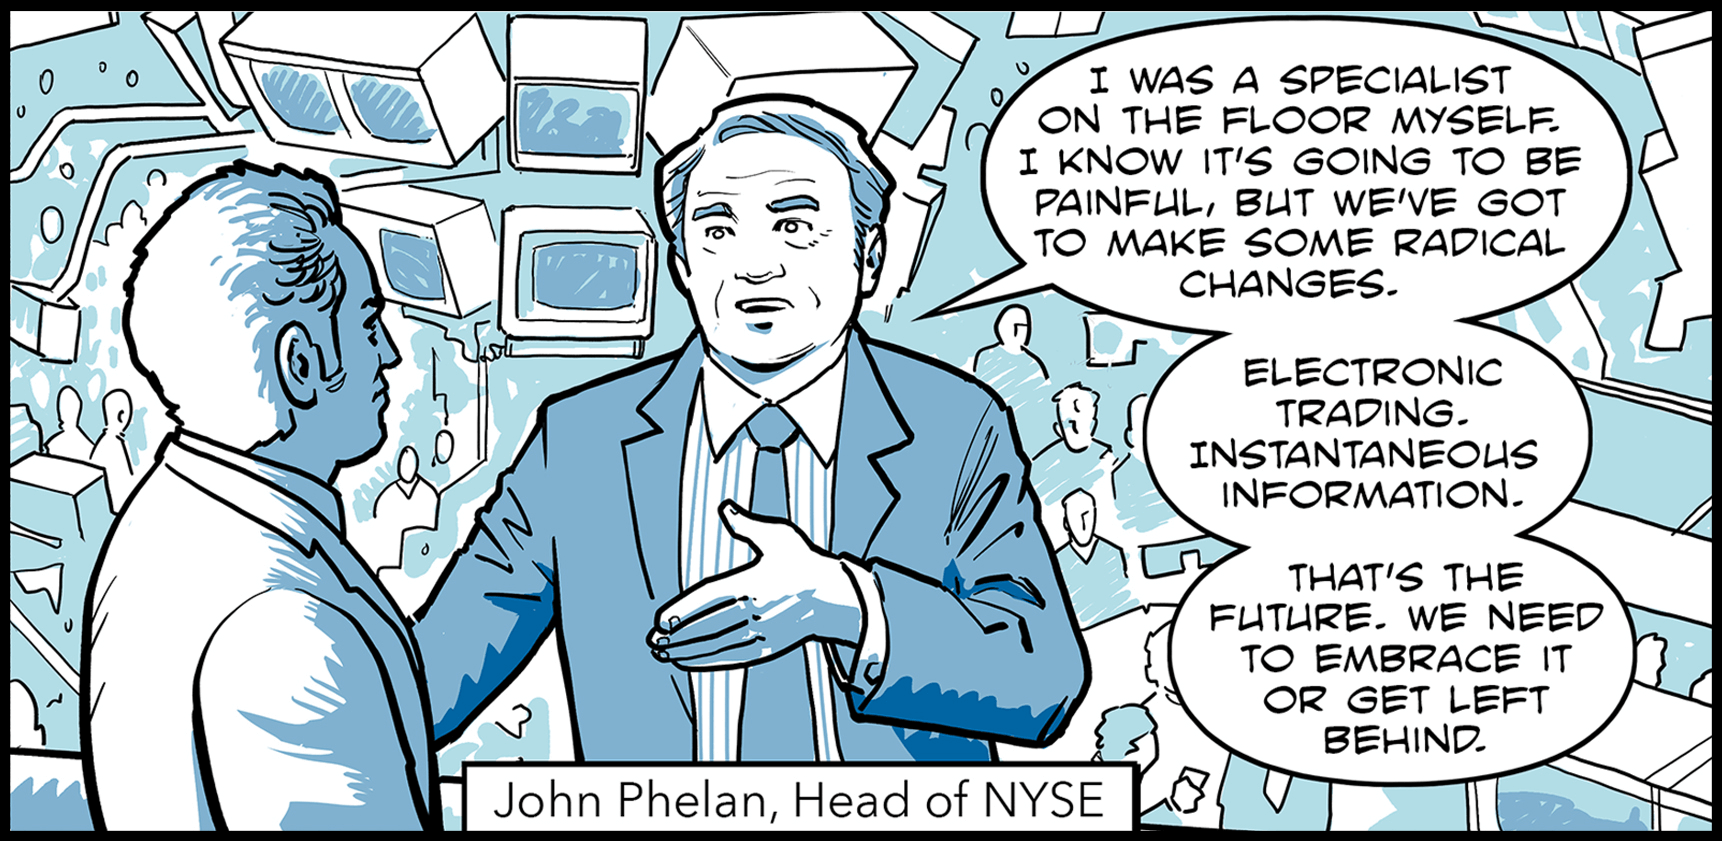 John Phelan, head of the New York Stock Exchange, speaks to a colleague: I was a specialist on the floor myself. I know it’s going to be painful, but we’ve got to make some radical changes. Electronic trading. Instantaneous information. That’s the future. We need to embrace it or get left behind.